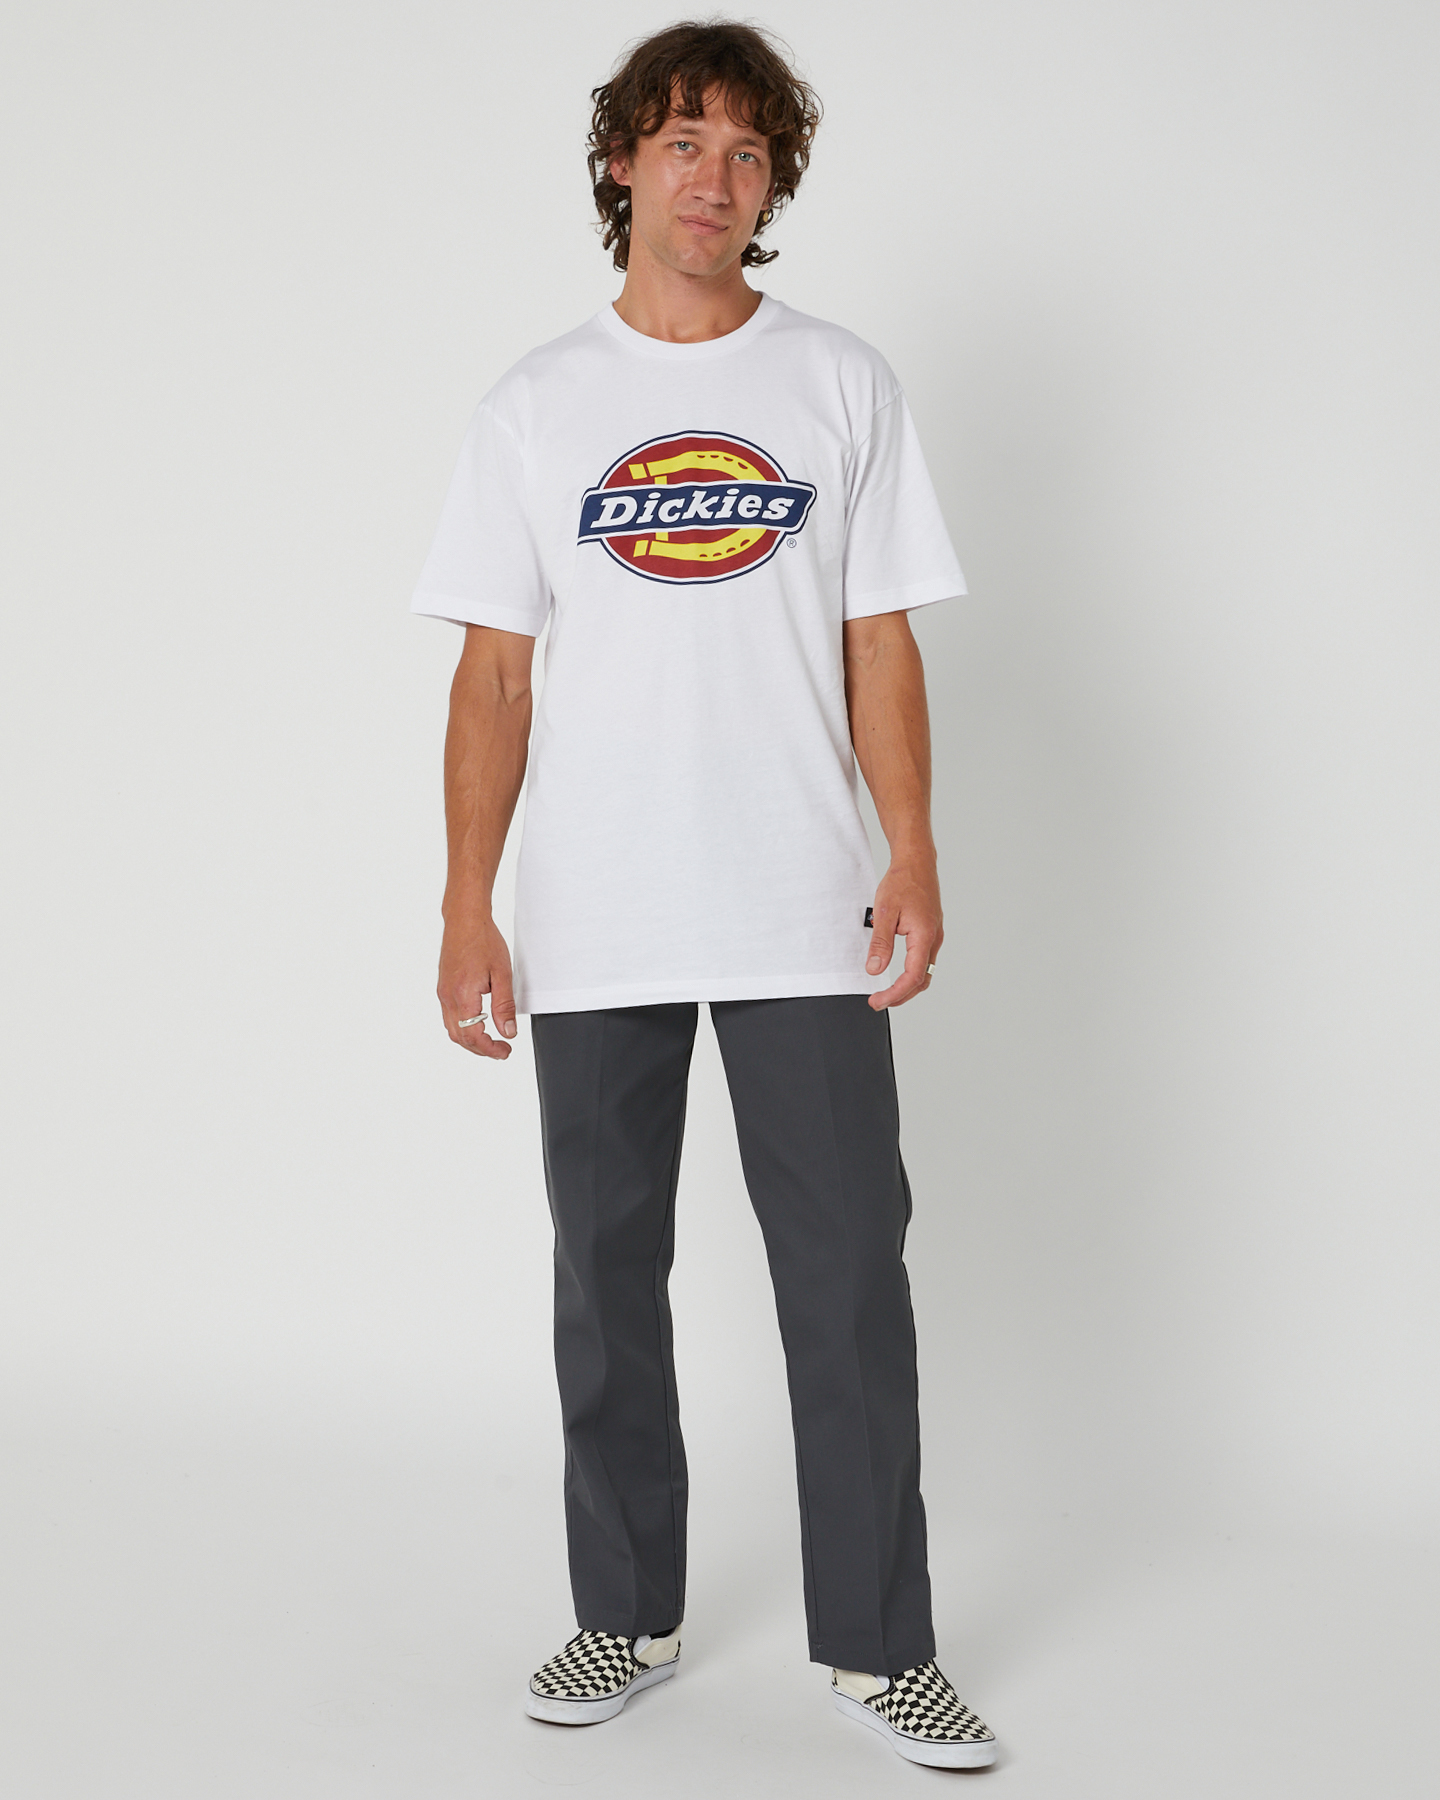 Dickies 873 Slim Straight Work Pant - Charcoal | SurfStitch